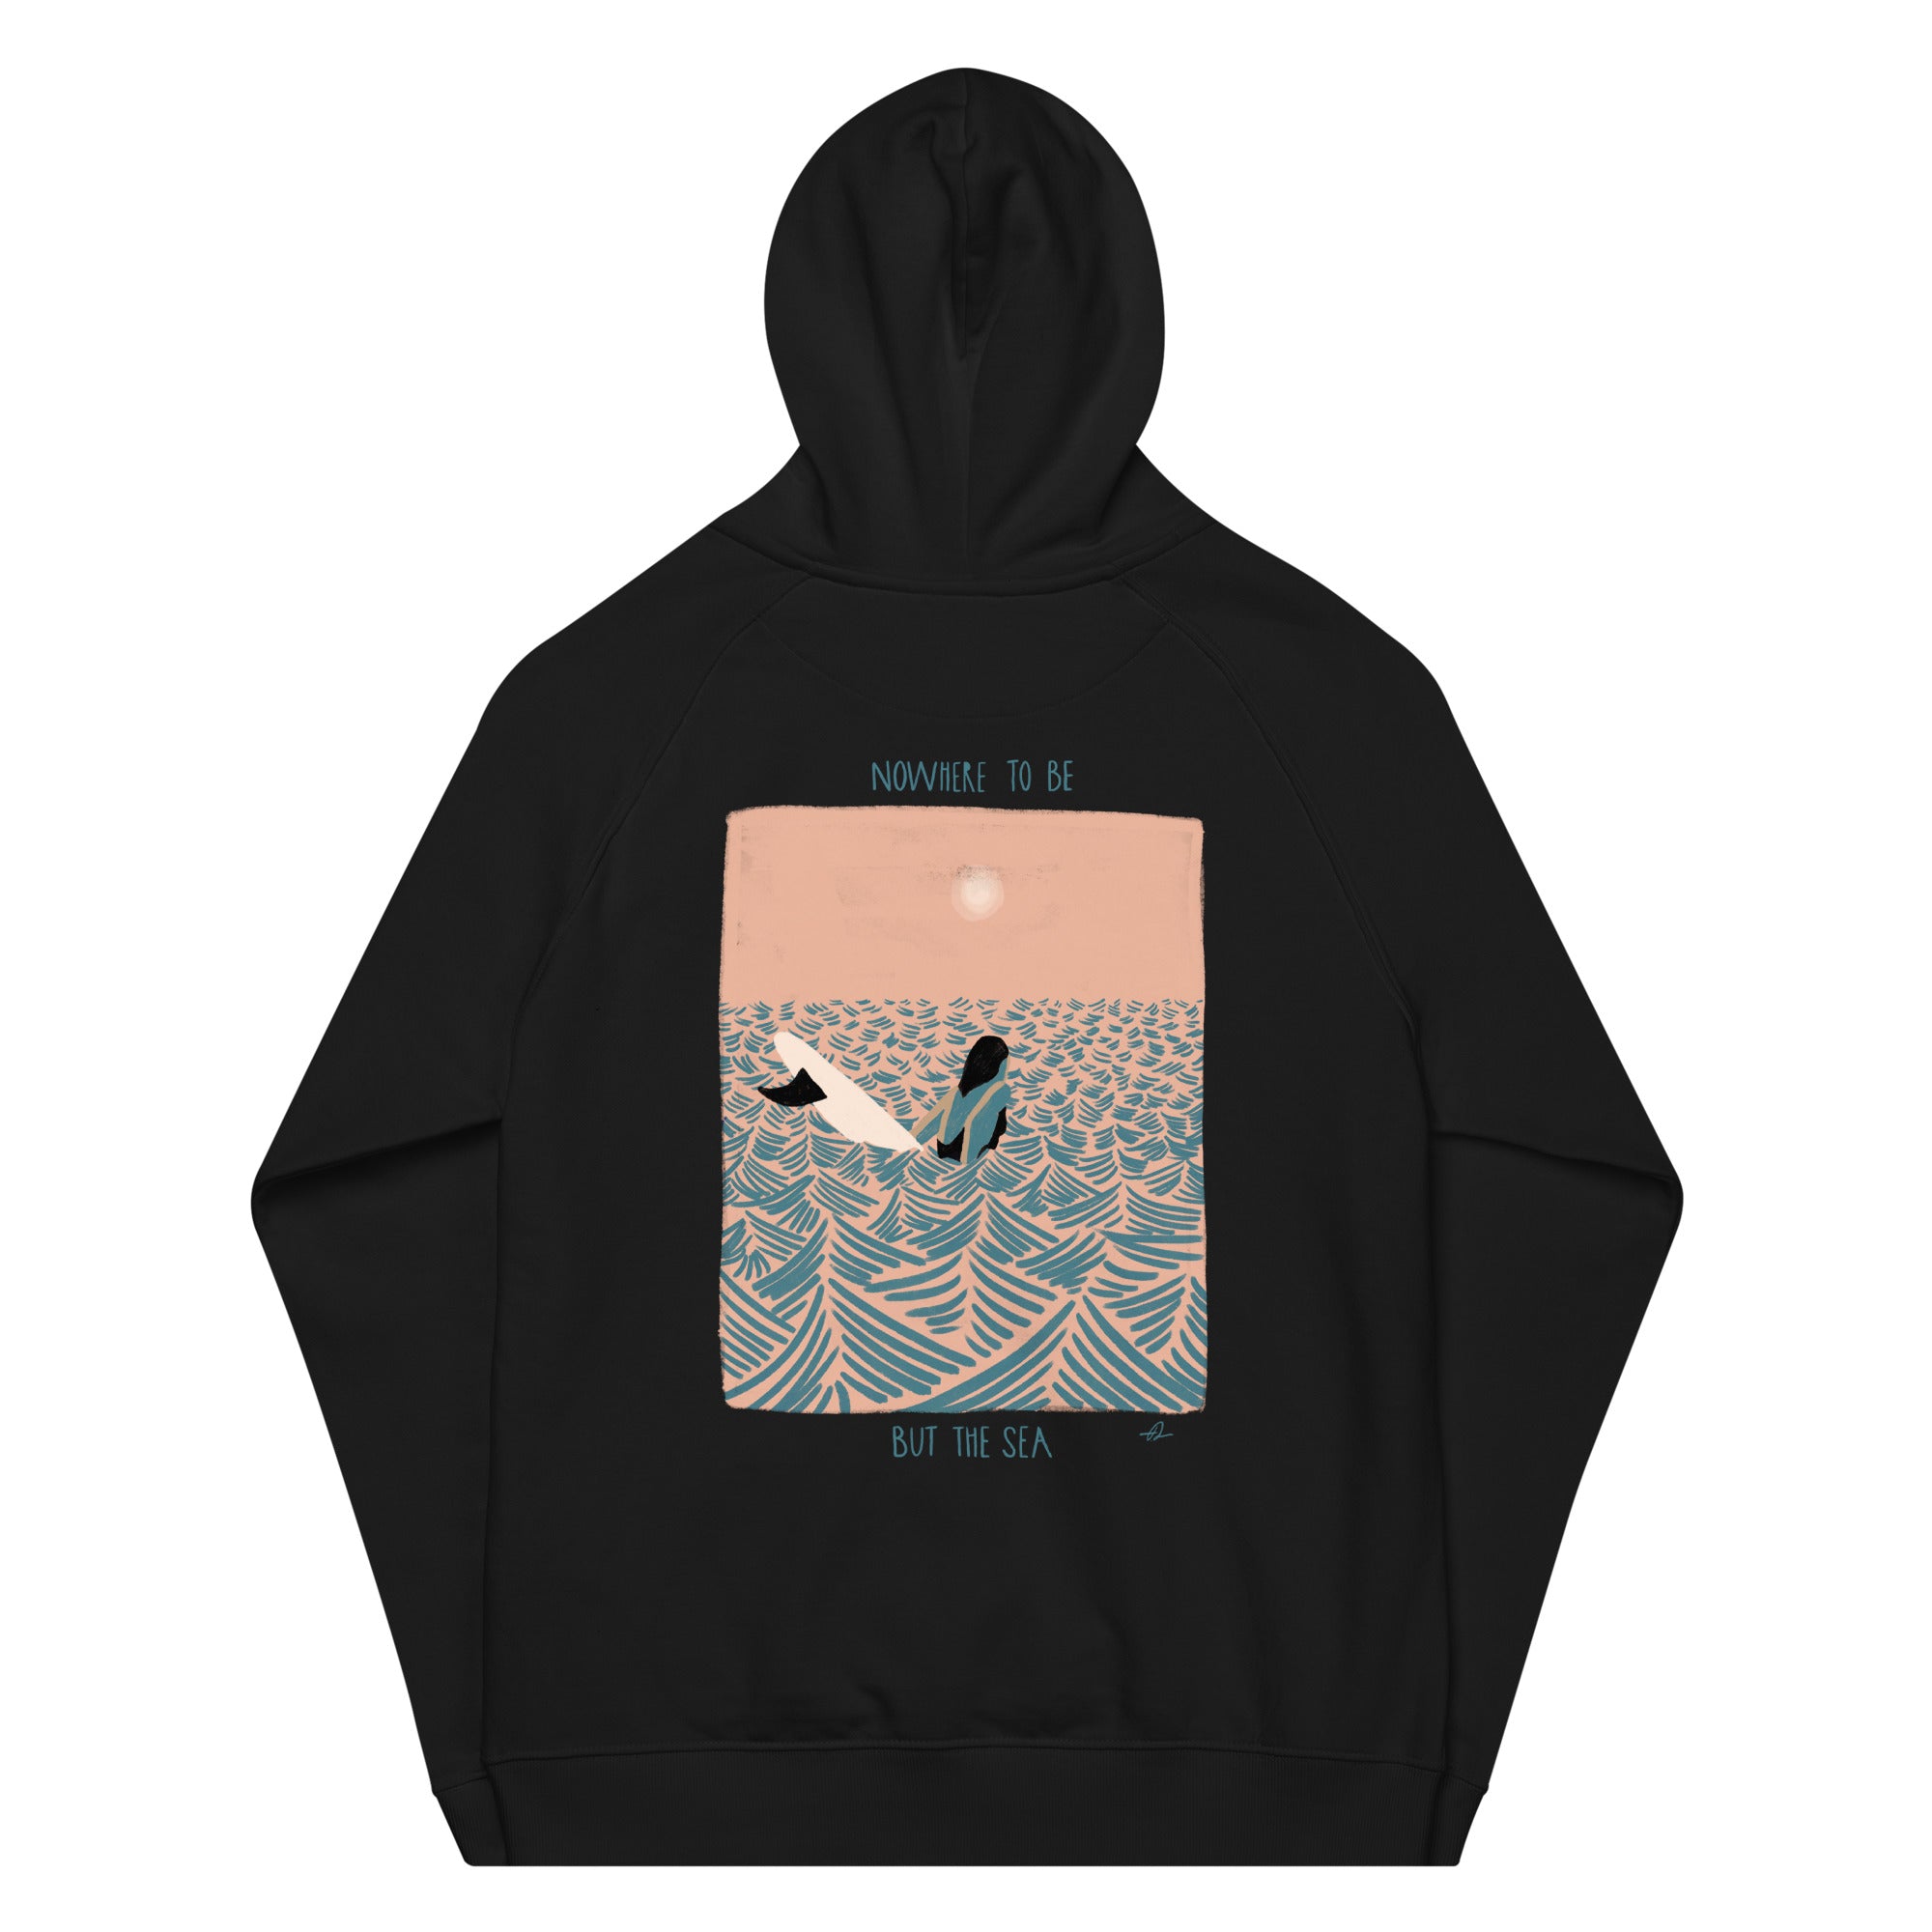 Nowhere to be but the sea Unisex eco raglan hoodie